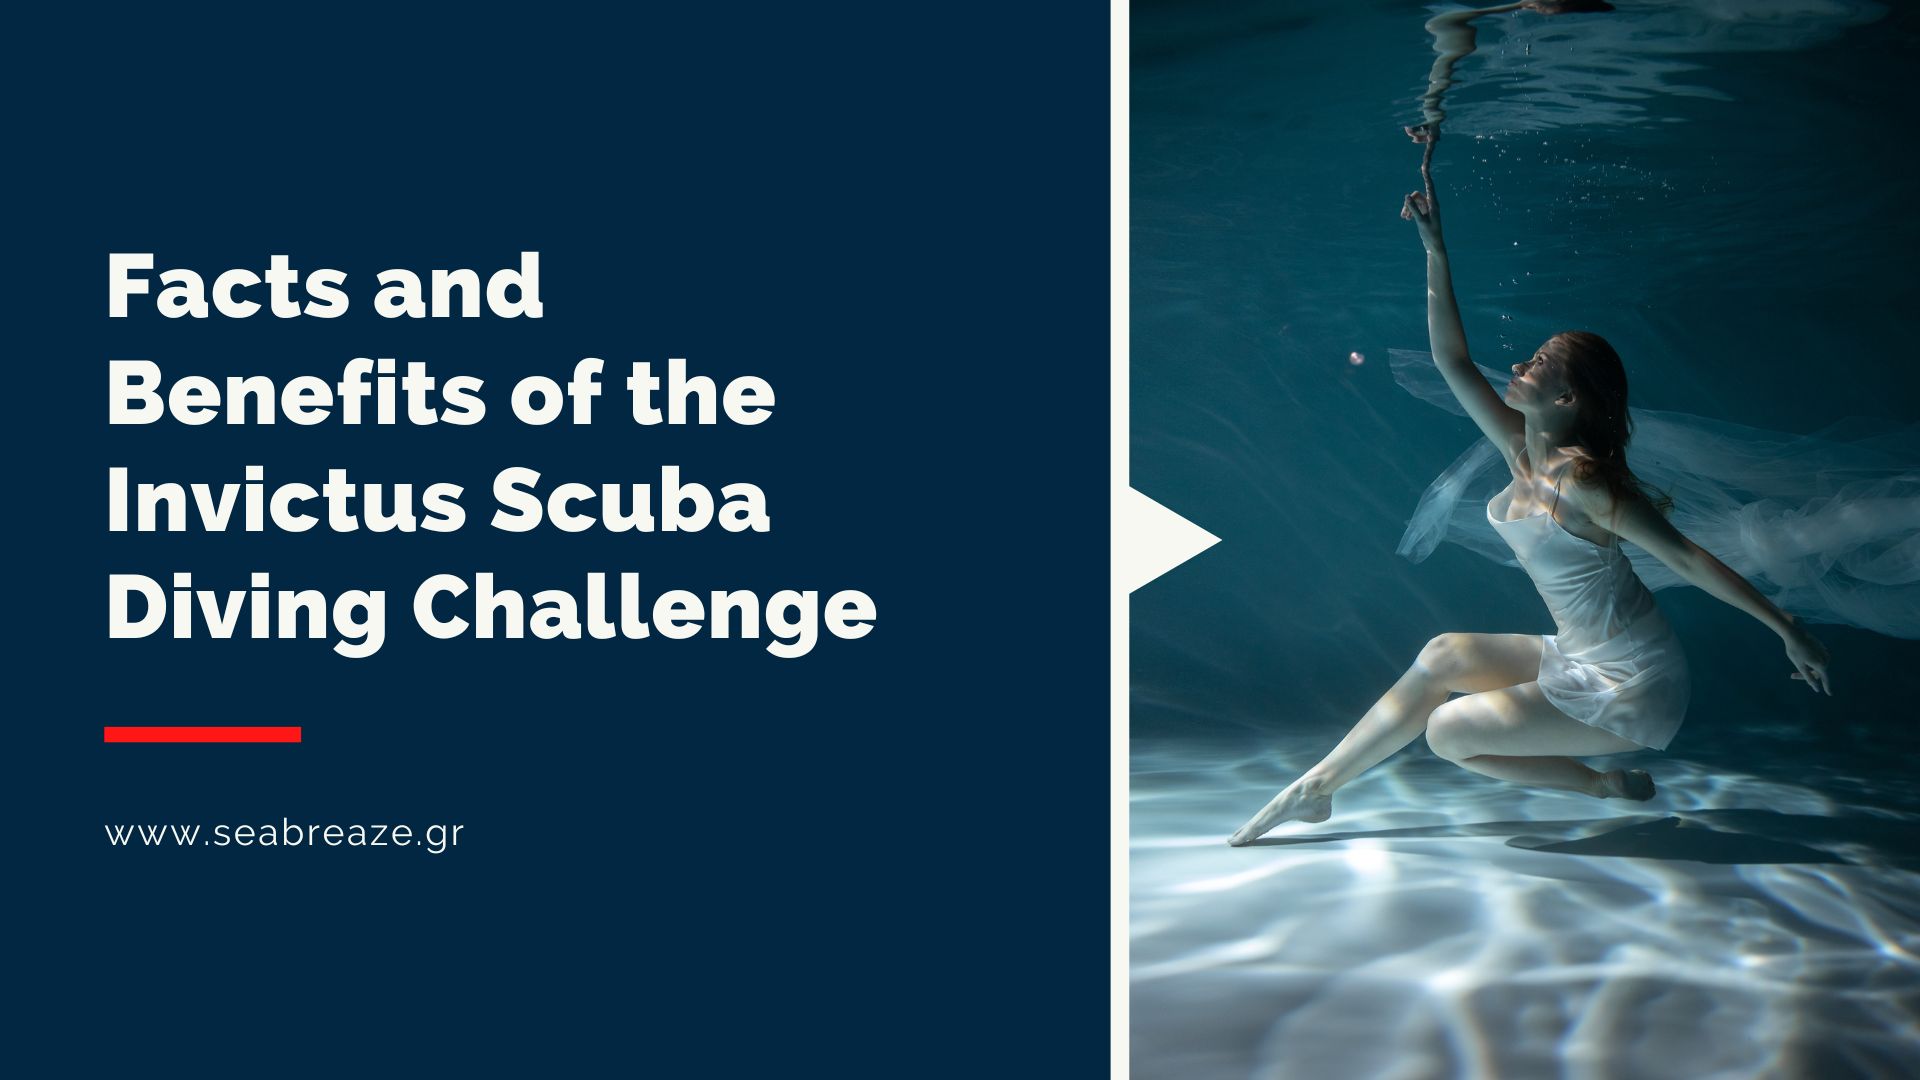 You are currently viewing Facts and Benefits of the Invictus Scuba Diving Challenge